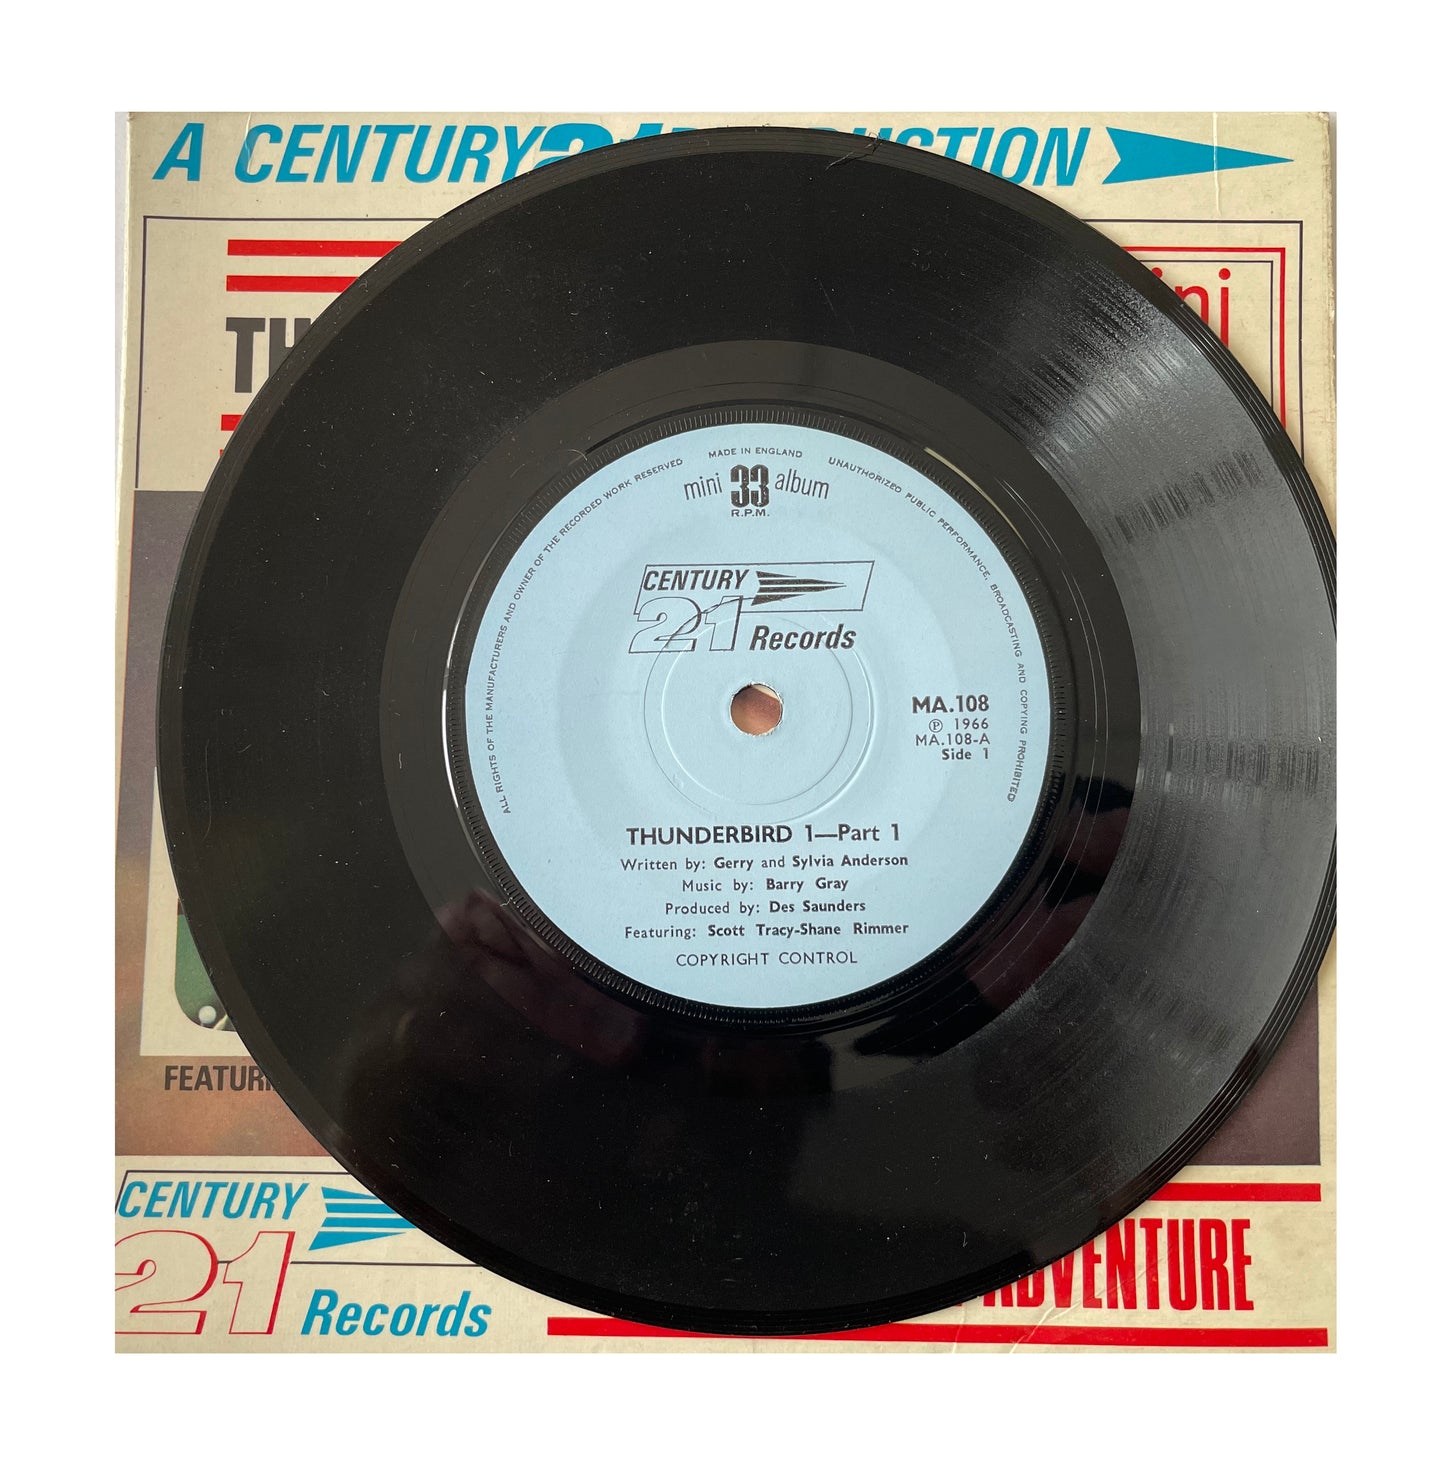 Vintage 1966 Gerry Andersons - A Century 21 Production - Thunderbird 1 Featuring Scott Tracy - 33RPM Mini Album - 21 Minutes Of Adventure Vinyl Record